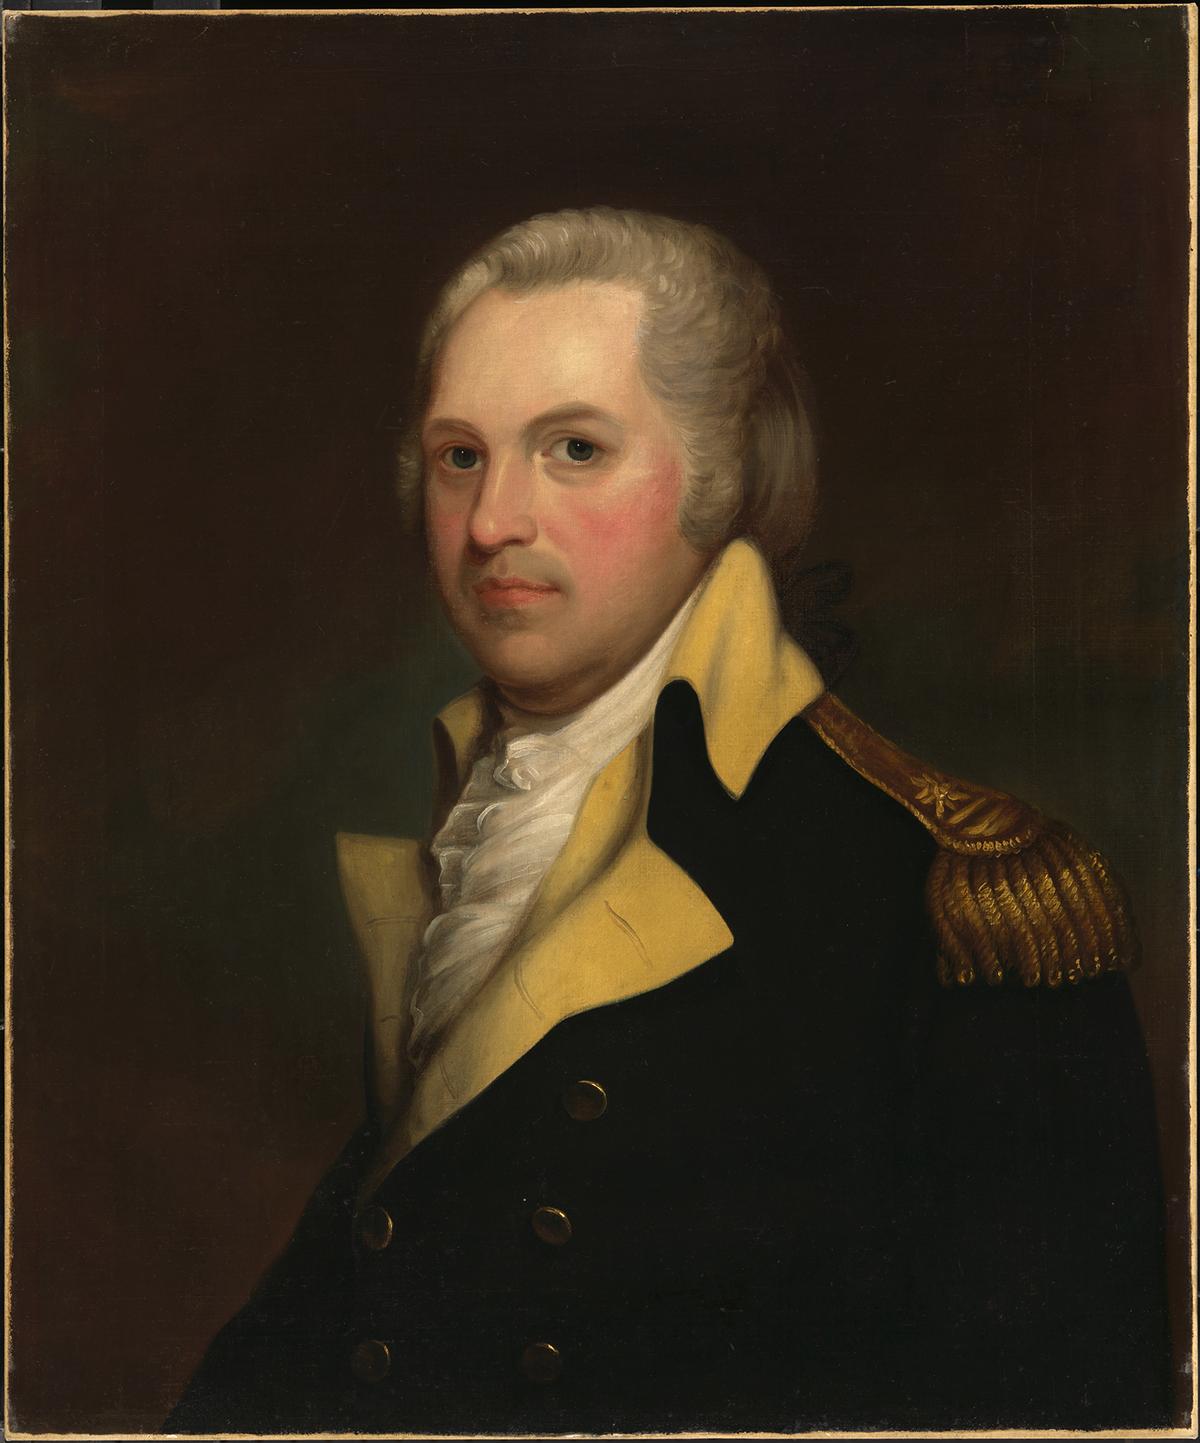 A portrait of Robert's father Light-Horse Harry Lee, circa 1834, by James Herring after a painting by Gilbert Stuart. Oil on canvas. The National Portrait Gallery, Washington, D.C. (Public Domain)